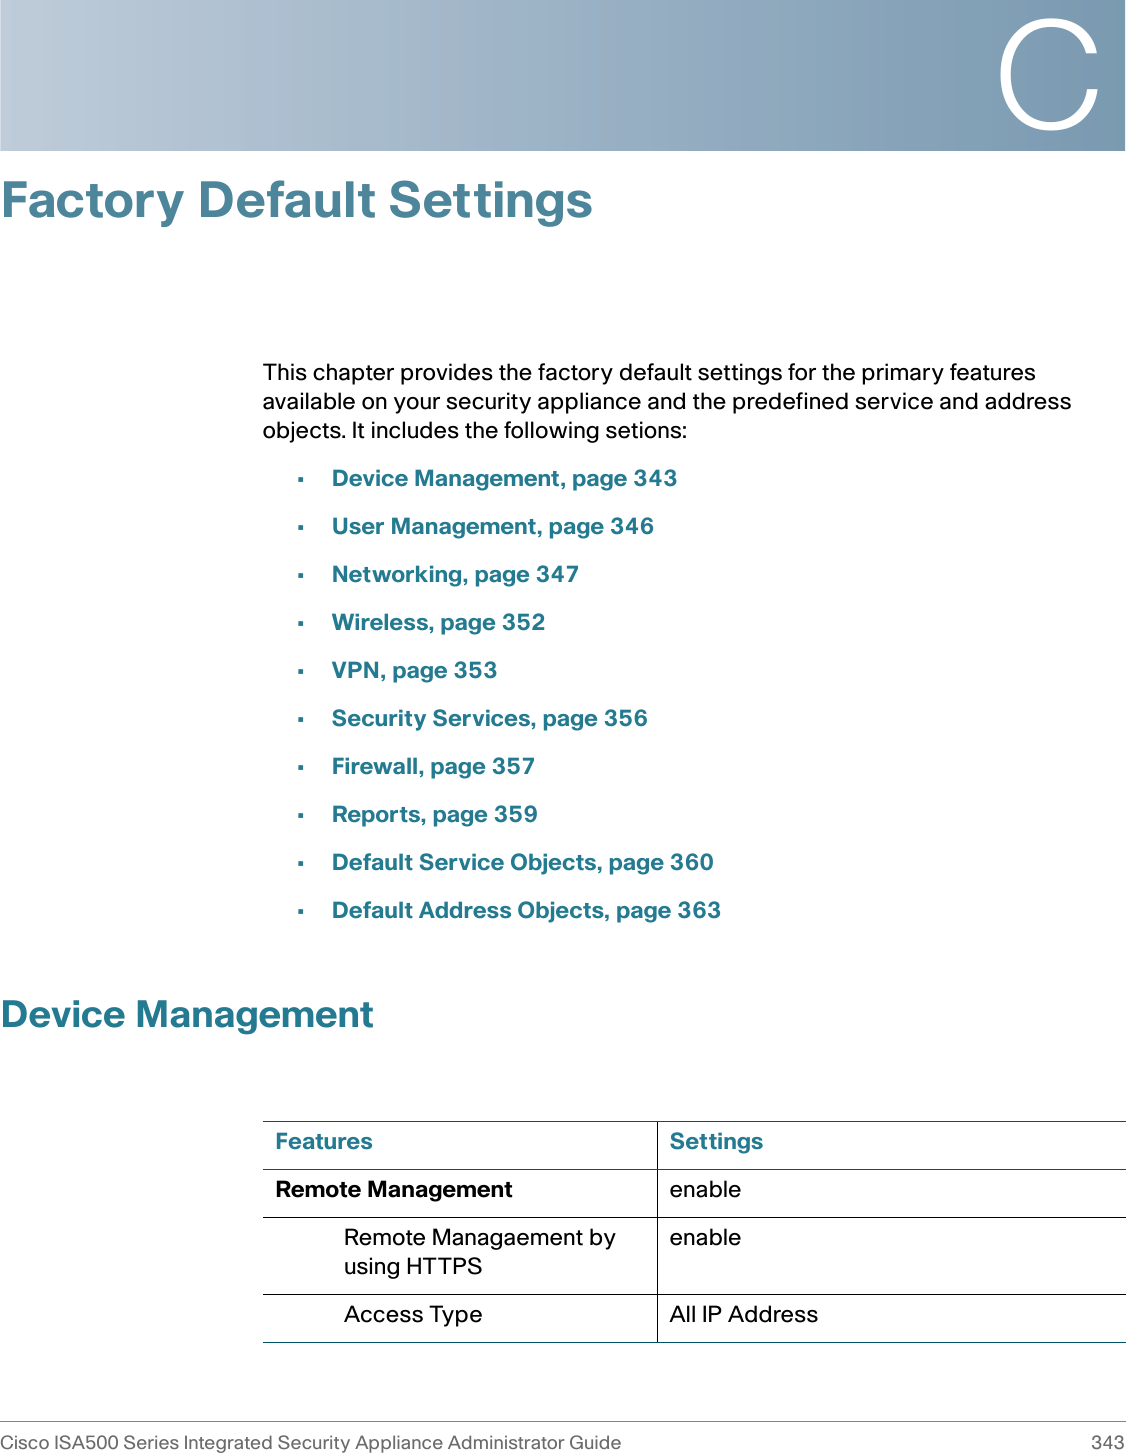 CCisco ISA500 Series Integrated Security Appliance Administrator Guide 343 Factory Default SettingsThis chapter provides the factory default settings for the primary features available on your security appliance and the predefined service and address objects. It includes the following setions:•Device Management, page 343•User Management, page 346•Networking, page 347•Wireless, page 352•VPN, page 353•Security Services, page 356•Firewall, page 357•Reports, page 359•Default Service Objects, page 360•Default Address Objects, page 363Device ManagementFeatures SettingsRemote Management enableRemote Managaement by using HTTPSenableAccess Type All IP Address